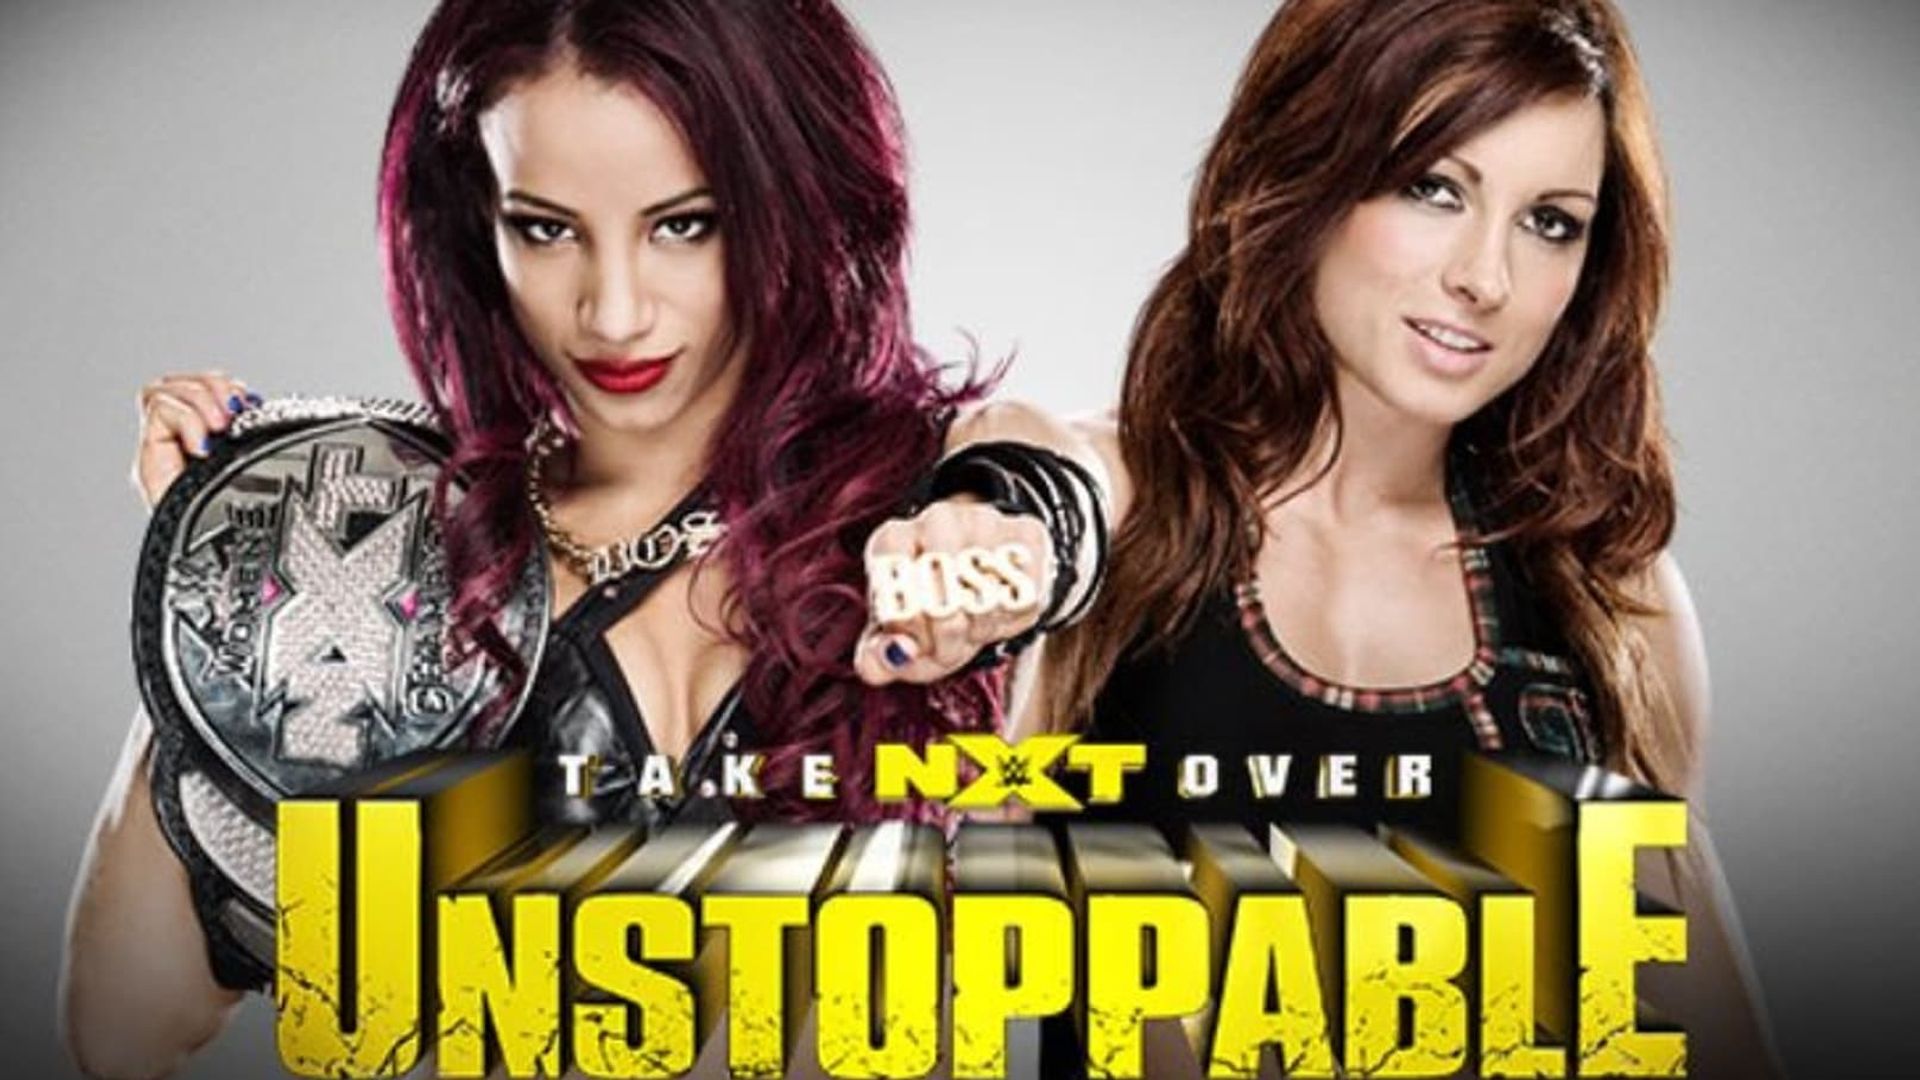 NXT Takeover: Unstoppable background